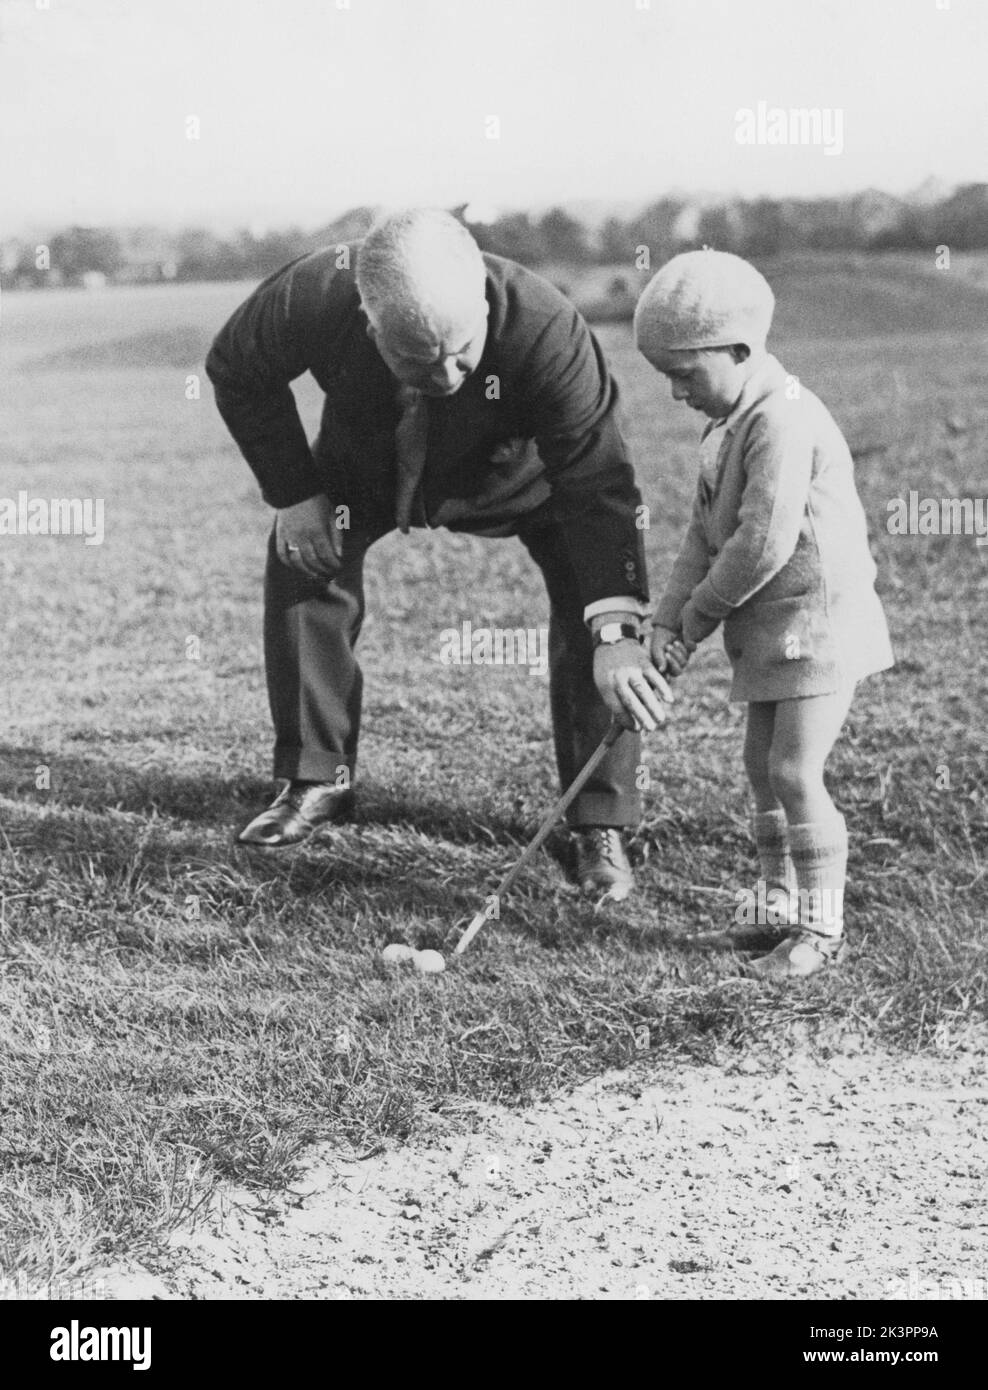 Golf in the 1930s. A cute scene at the Woodcote course where five-year old Derick Paine is given some advice by his father how to hold the golf club. 28 september 1934. Woodcote Park Golf Club was founded in 1912 and is located between and Purley and Coulsdon in Surrey. Stock Photo